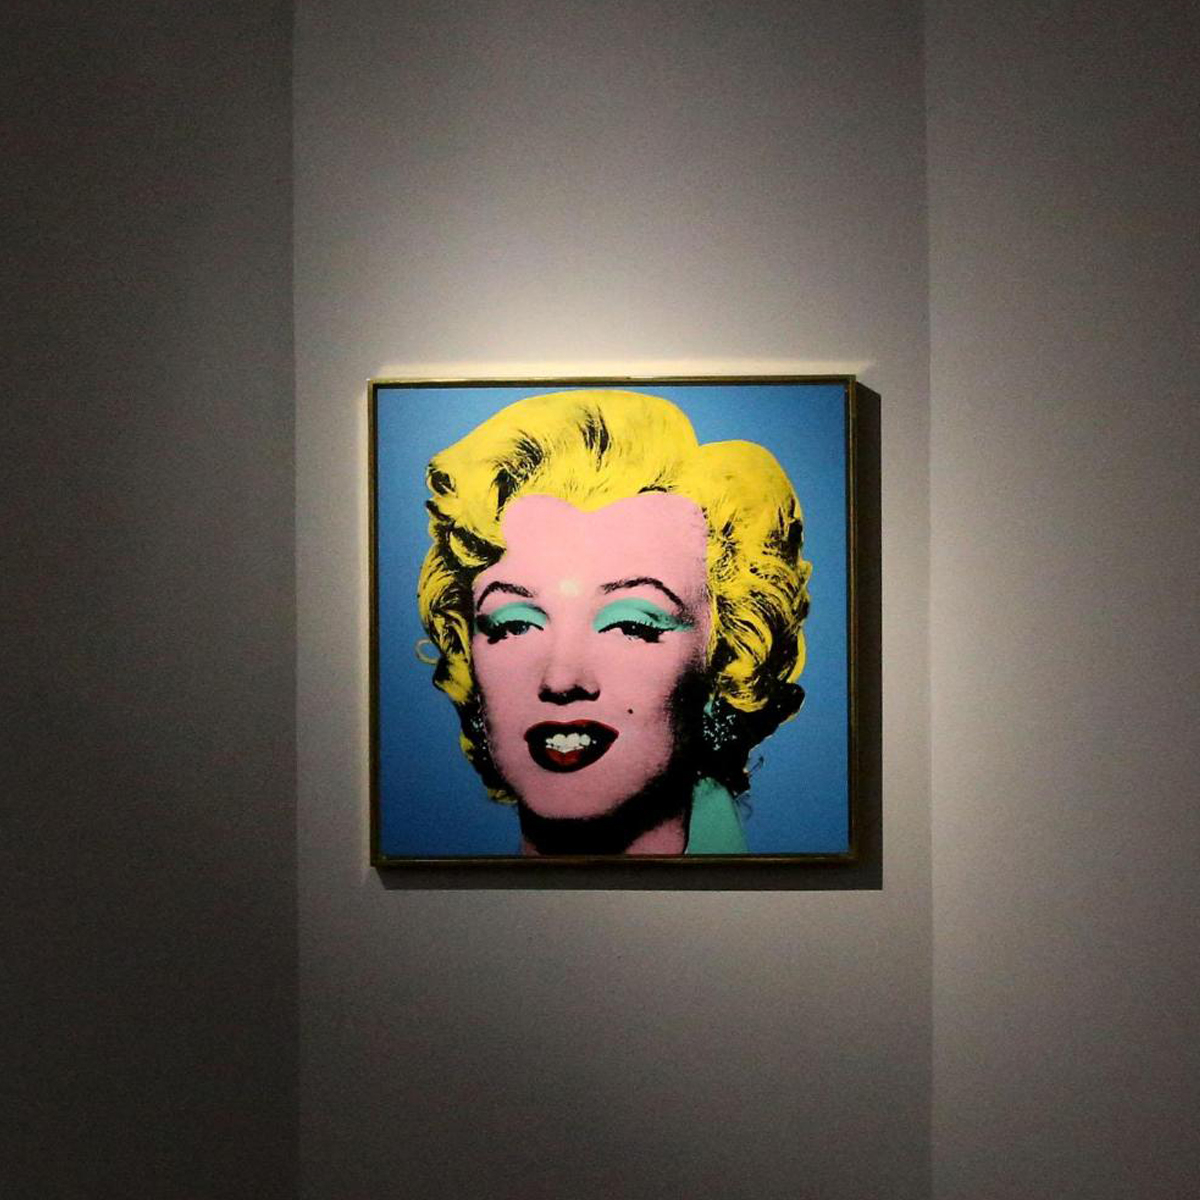 Andy Warhol's Famous Portrait of Marilyn Monroe Sells for $195 Million